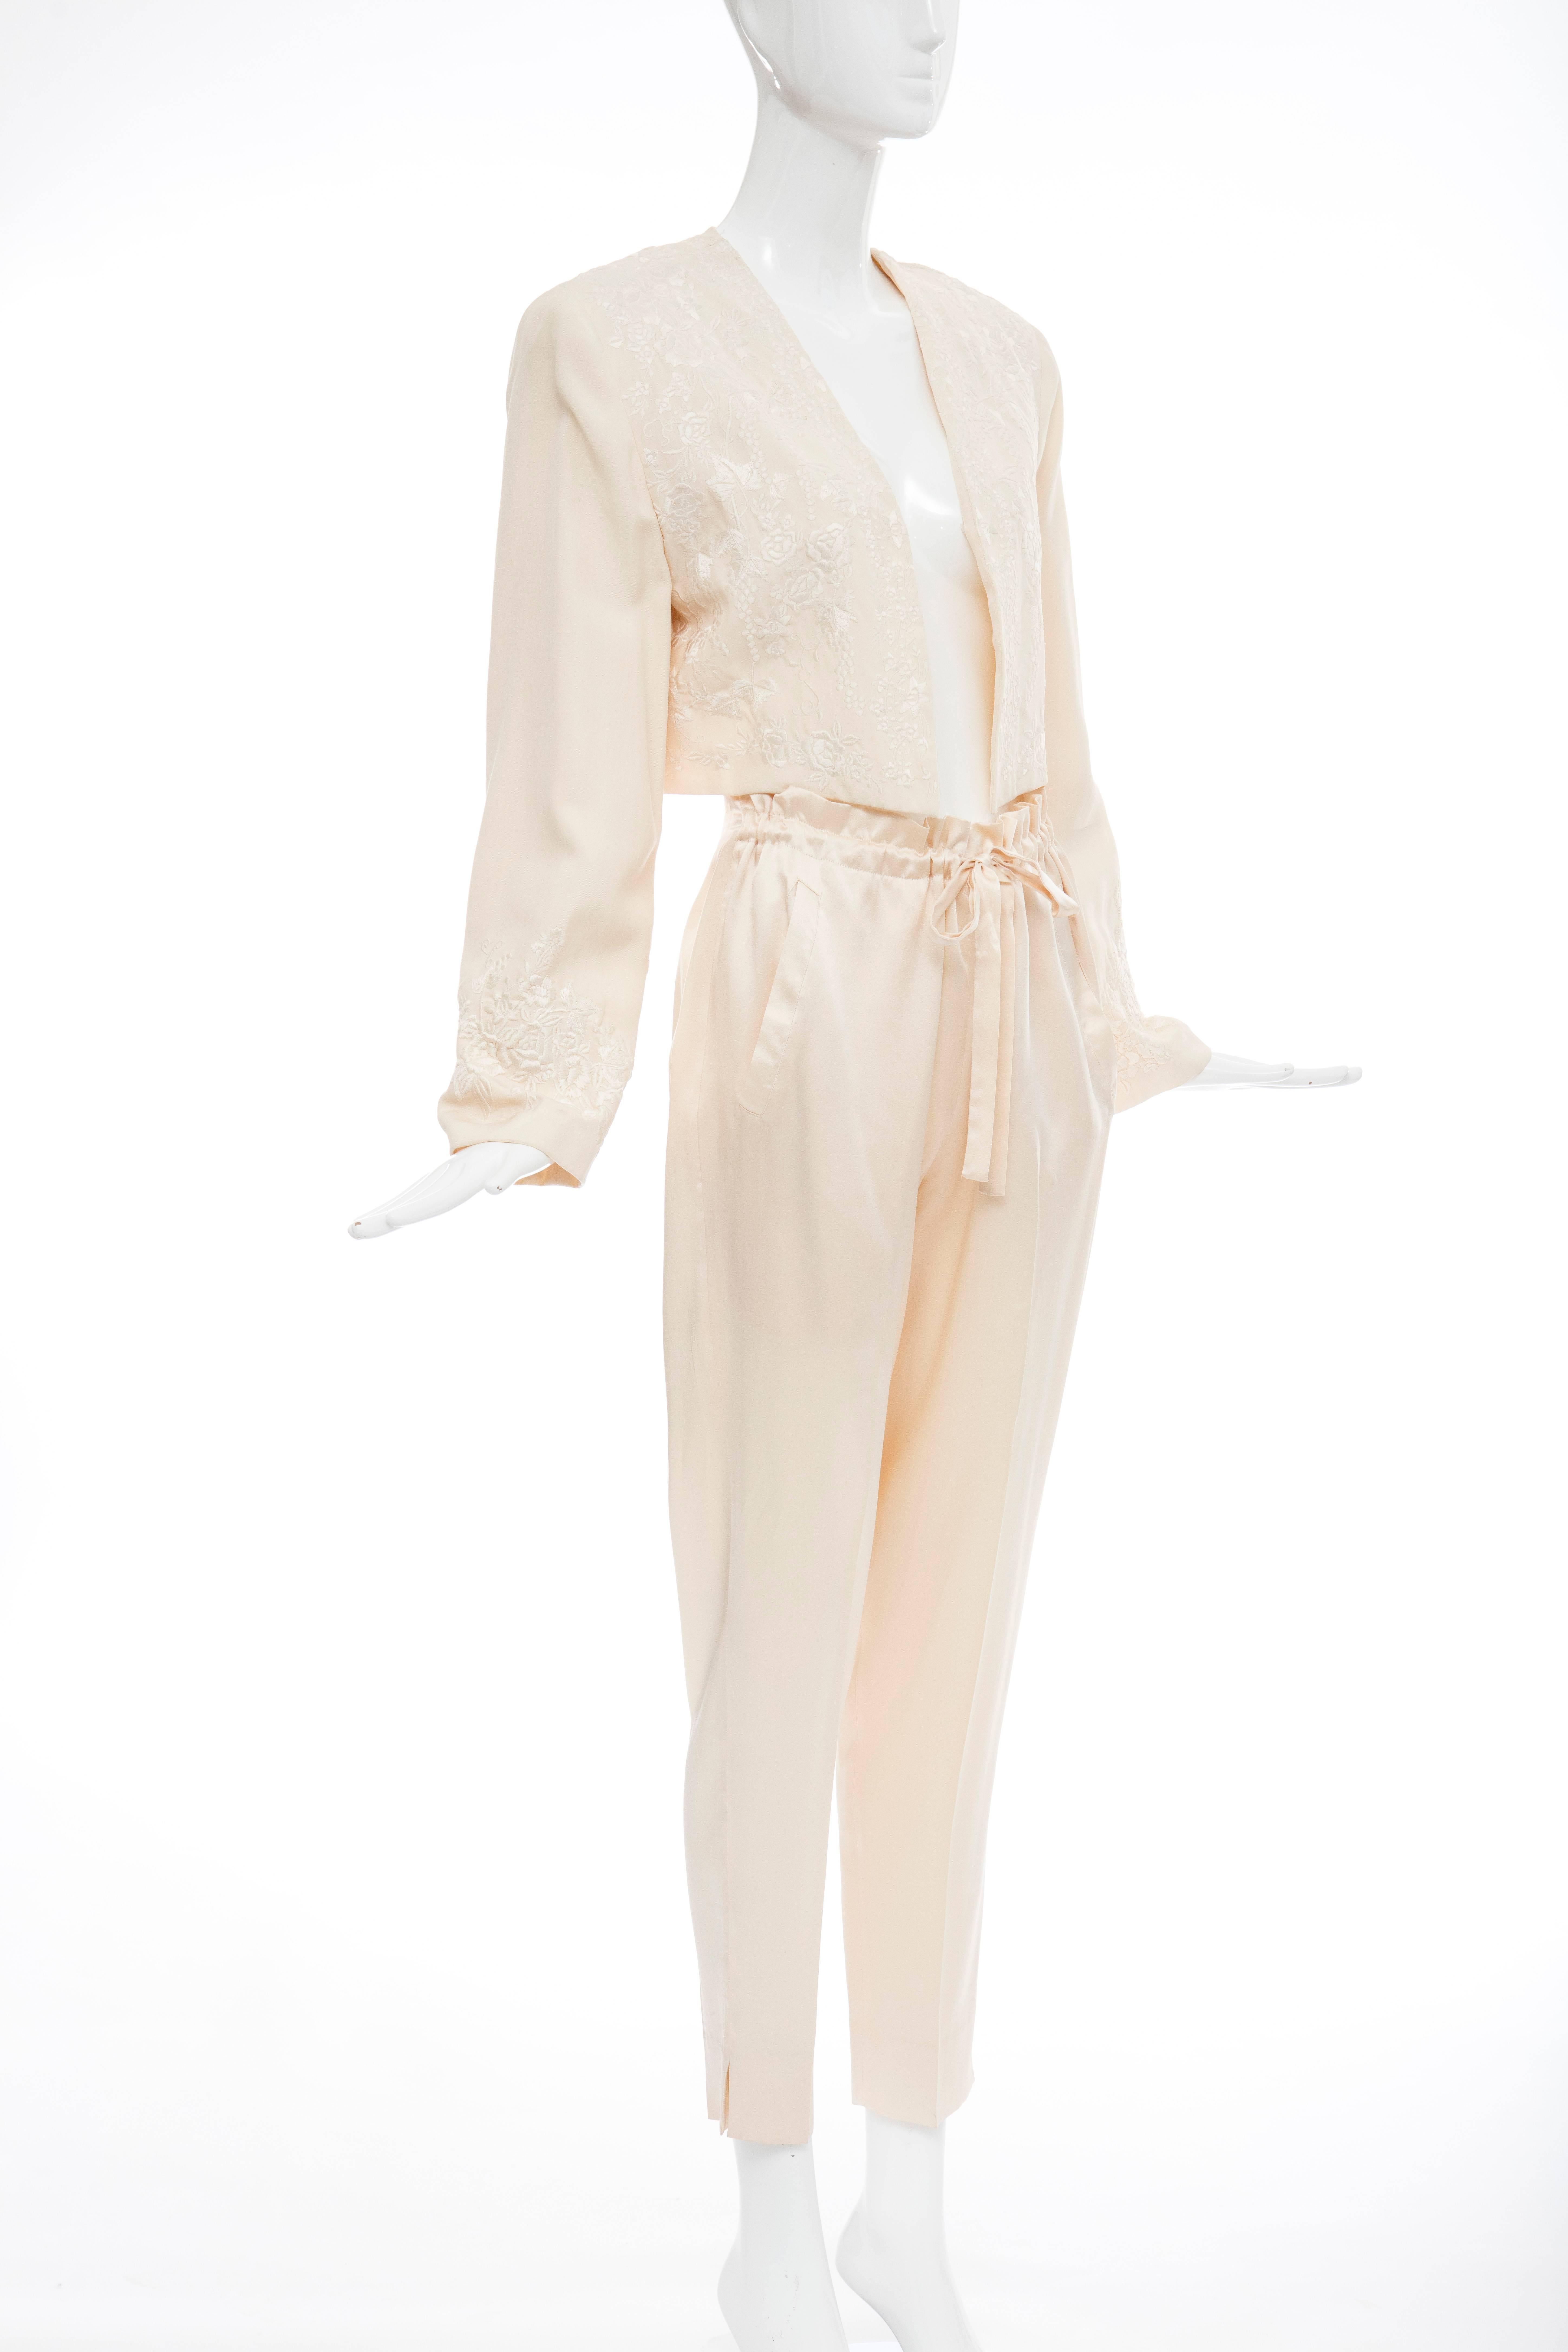 Donna Karan Cream Silk Embroidered Pant Suit, Circa 1980's In Good Condition For Sale In Cincinnati, OH